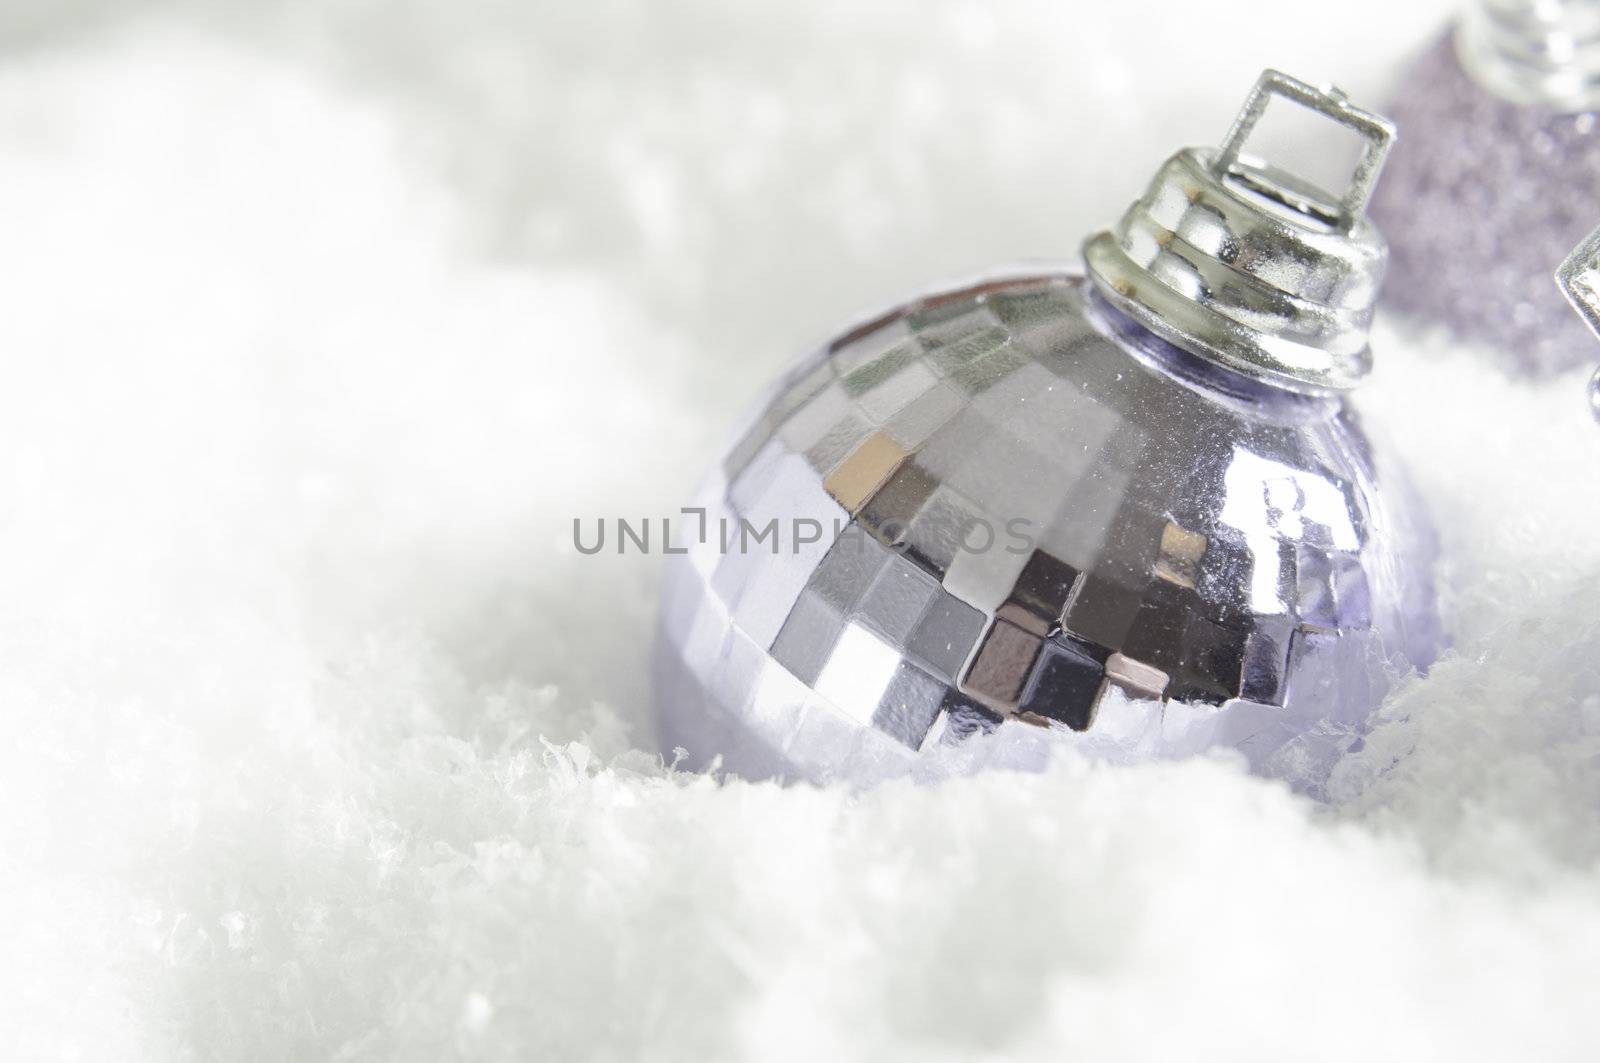 A lilac (light purple) Christmas bauble partly submerged in fake snow.  Snowy surface provides copy space to left and beneath the ornament.